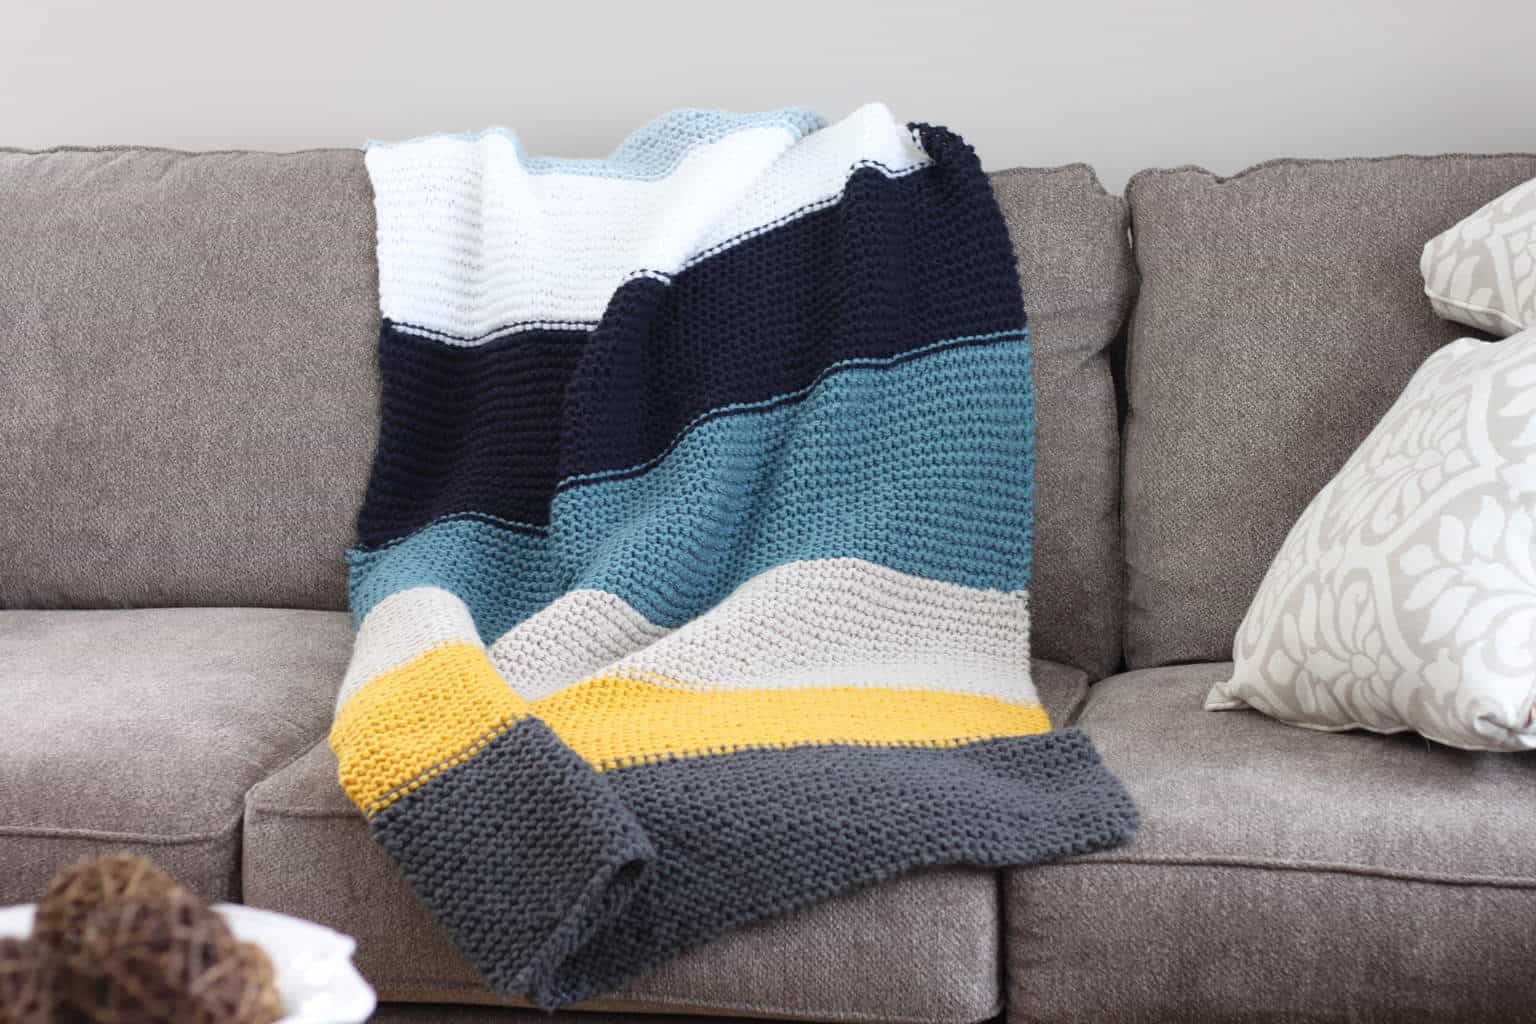 How to Knit a Blanket - Free Step by Step Beginner Knit ...